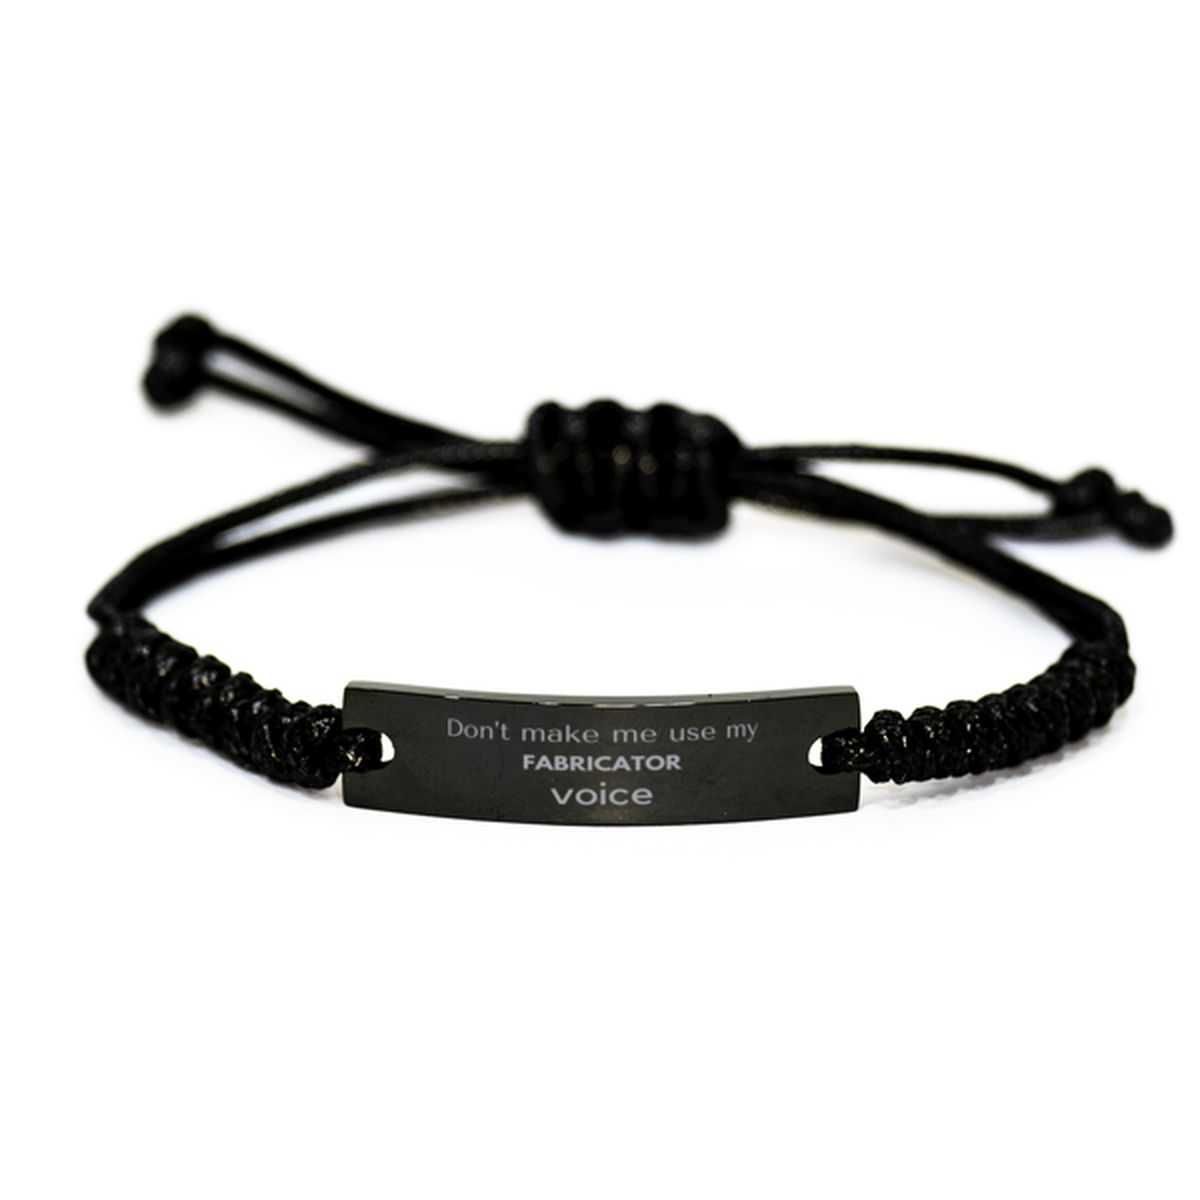 Don't make me use my Fabricator voice, Sarcasm Fabricator Gifts, Christmas Fabricator Black Rope Bracelet Birthday Unique Gifts For Fabricator Coworkers, Men, Women, Colleague, Friends